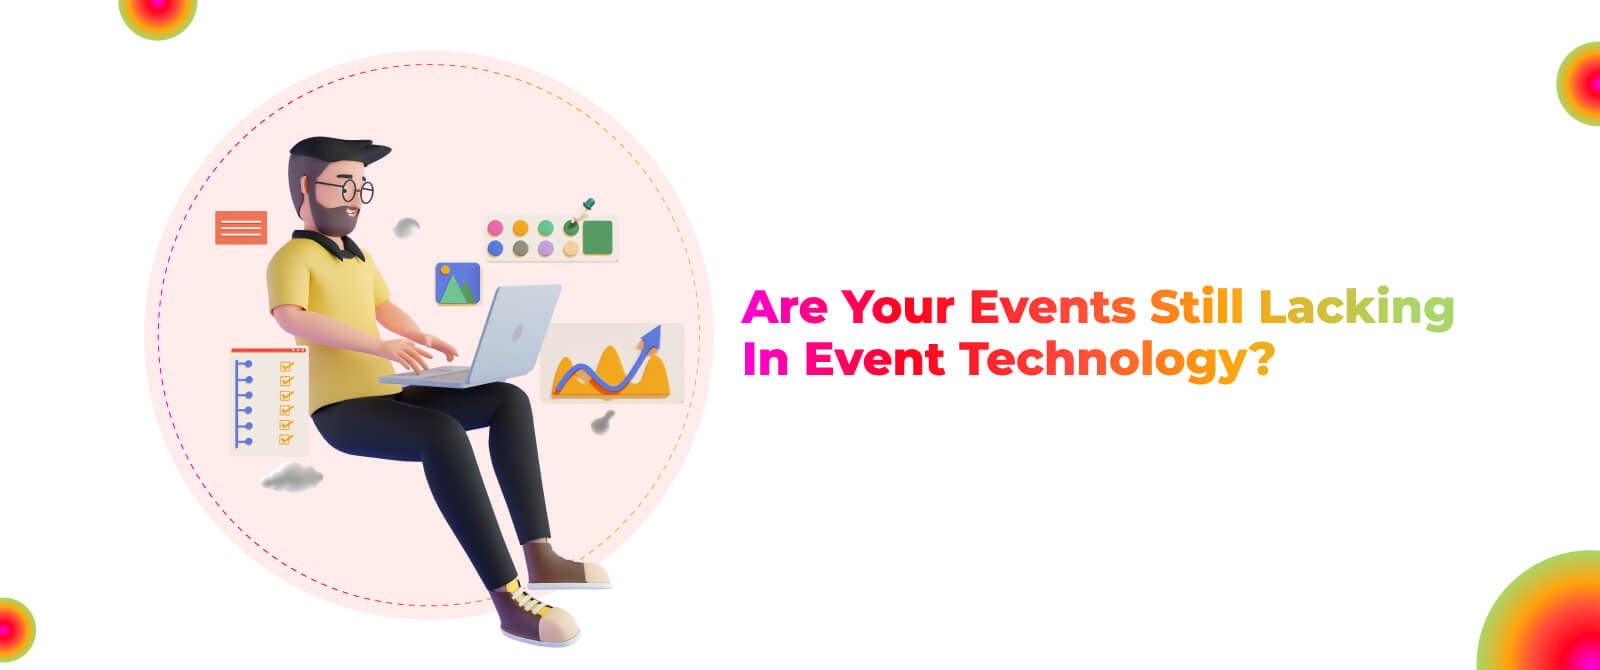 Are Your Events Still Lacking in Event Technology?